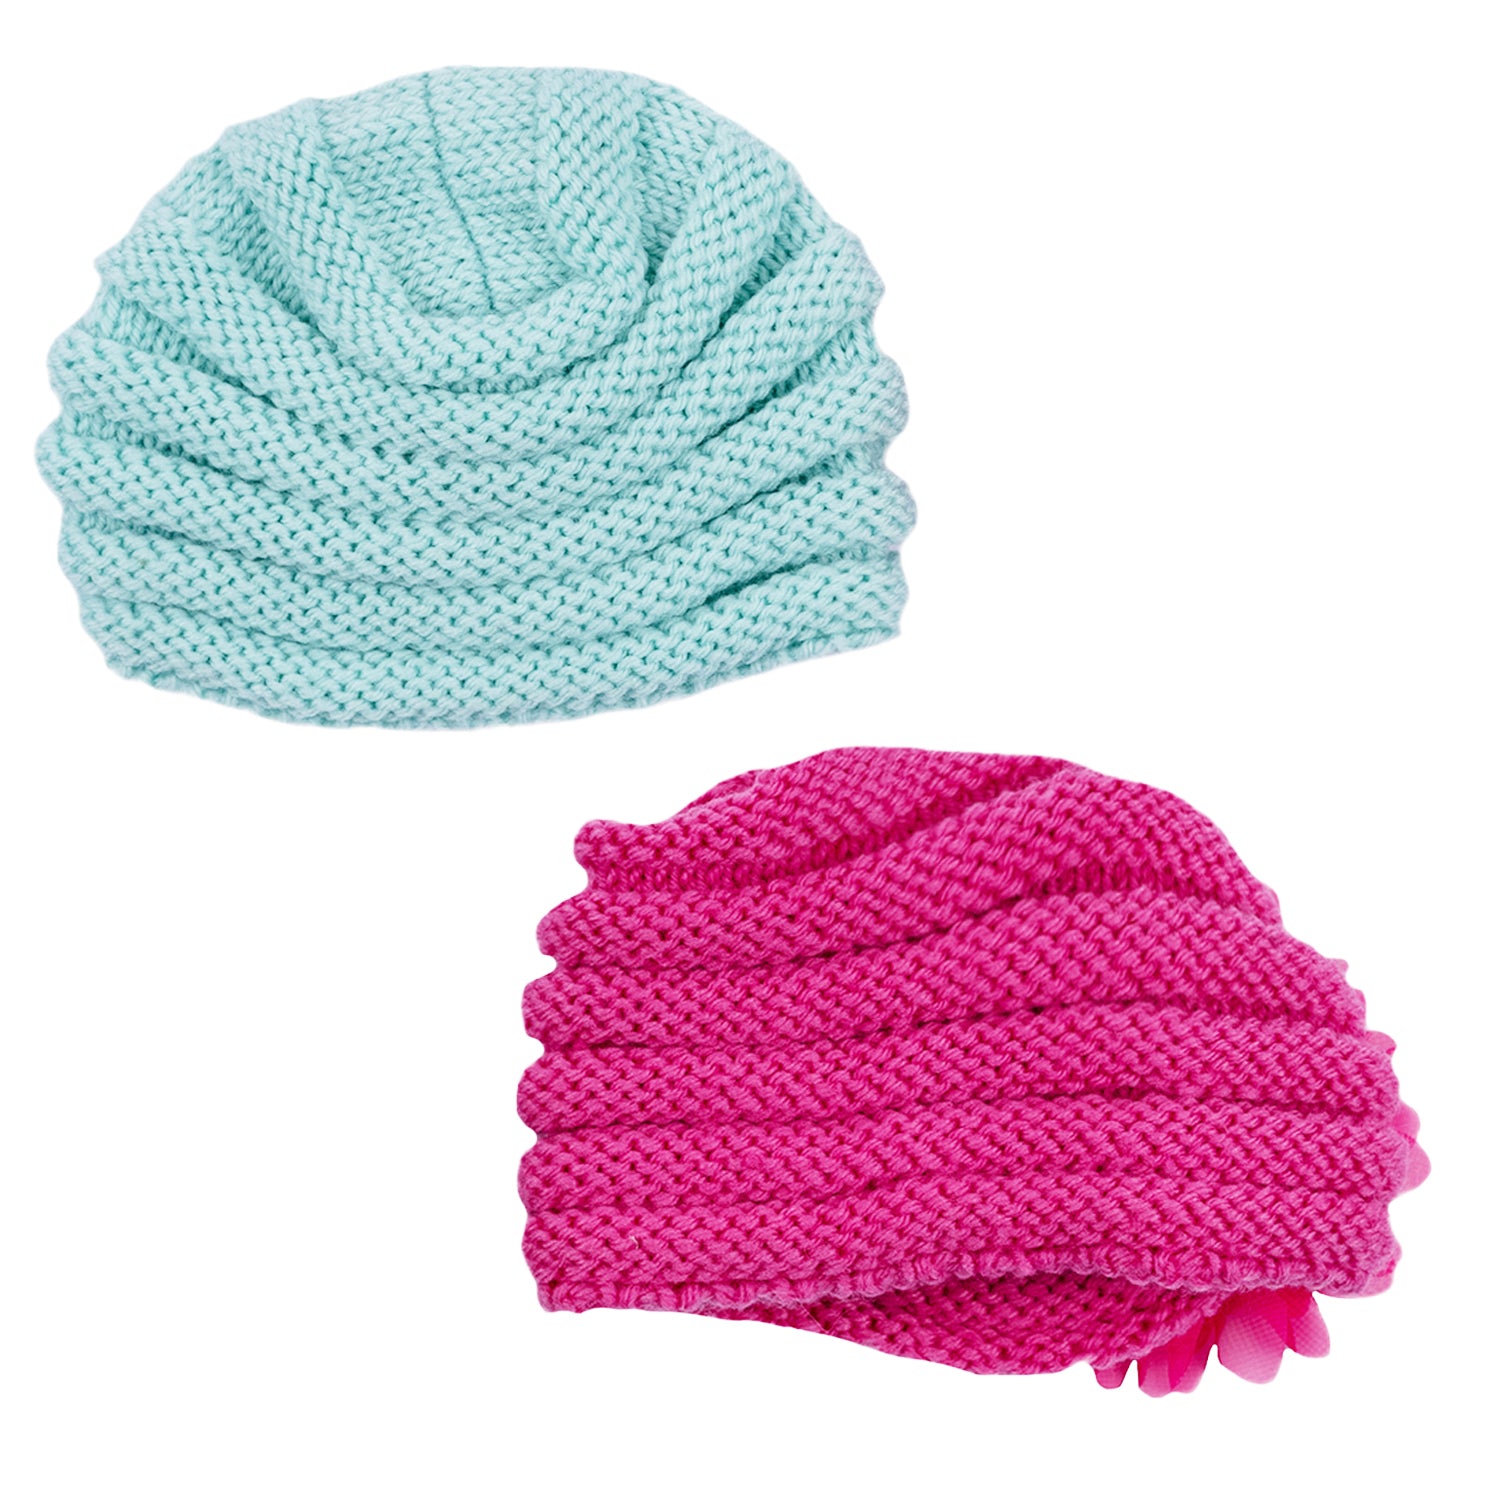 Baby Moo Girls Floral Petals 2 Pack Knitted Turban Caps - Turquoise, Maroon